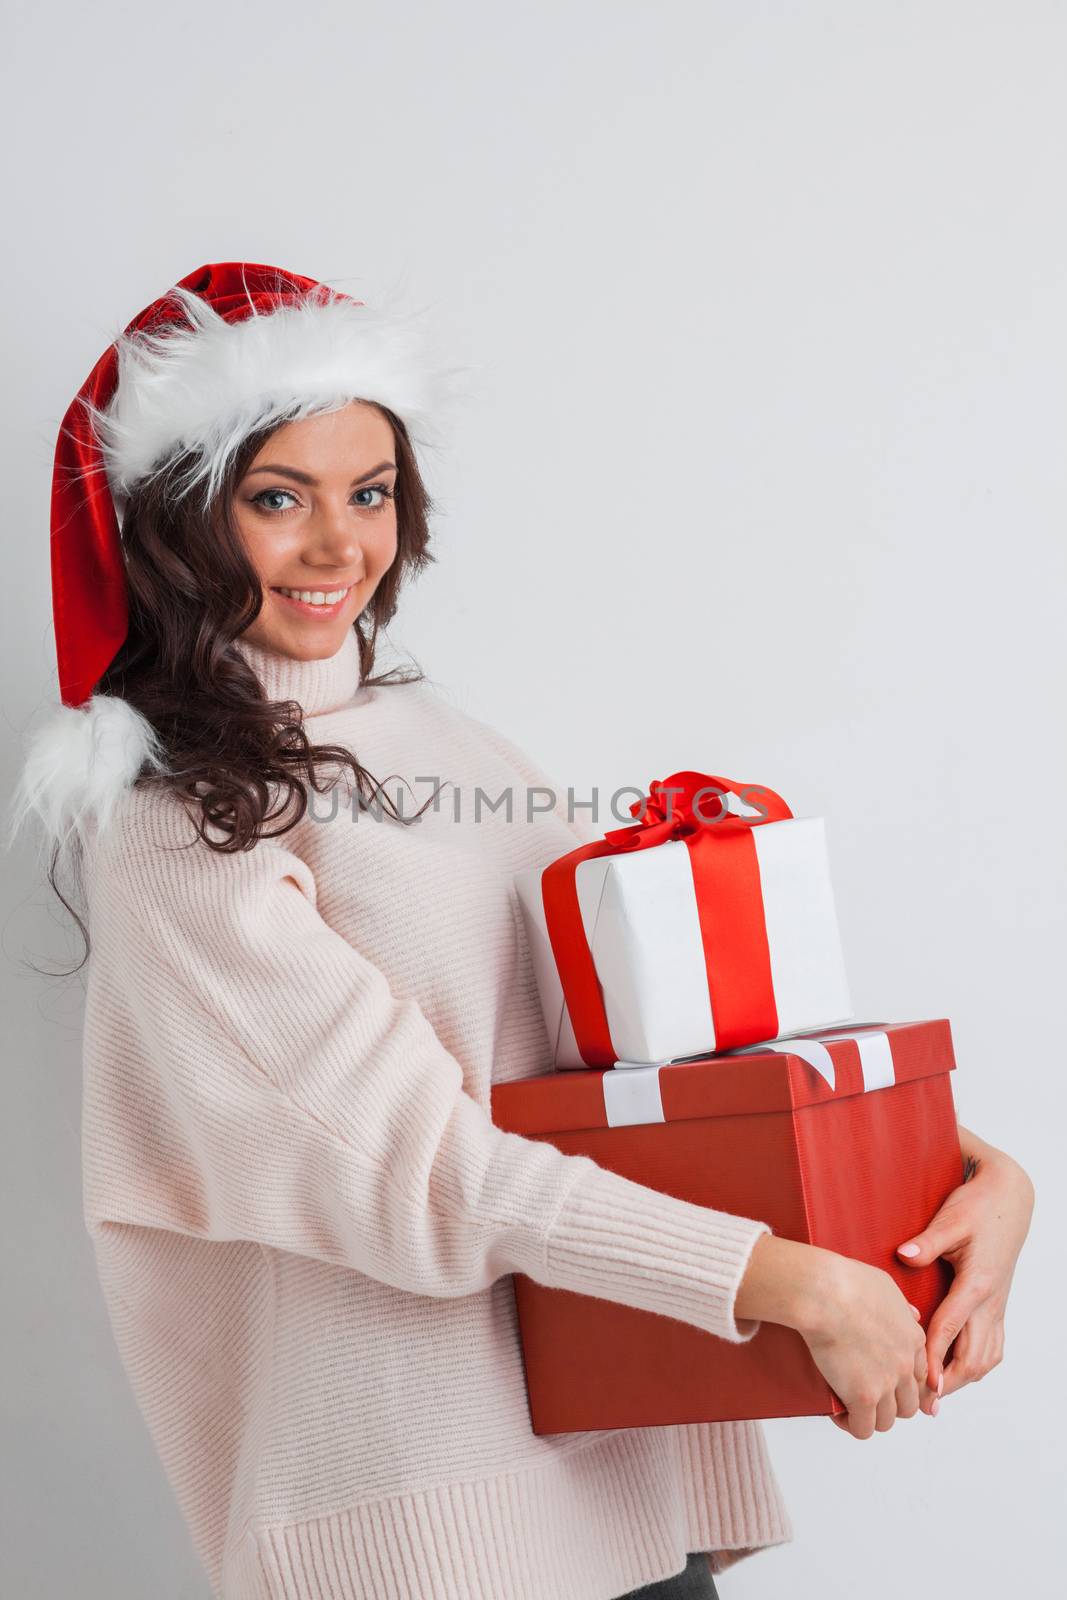 Happy woman in Santa hat with stack of Christmas gifts